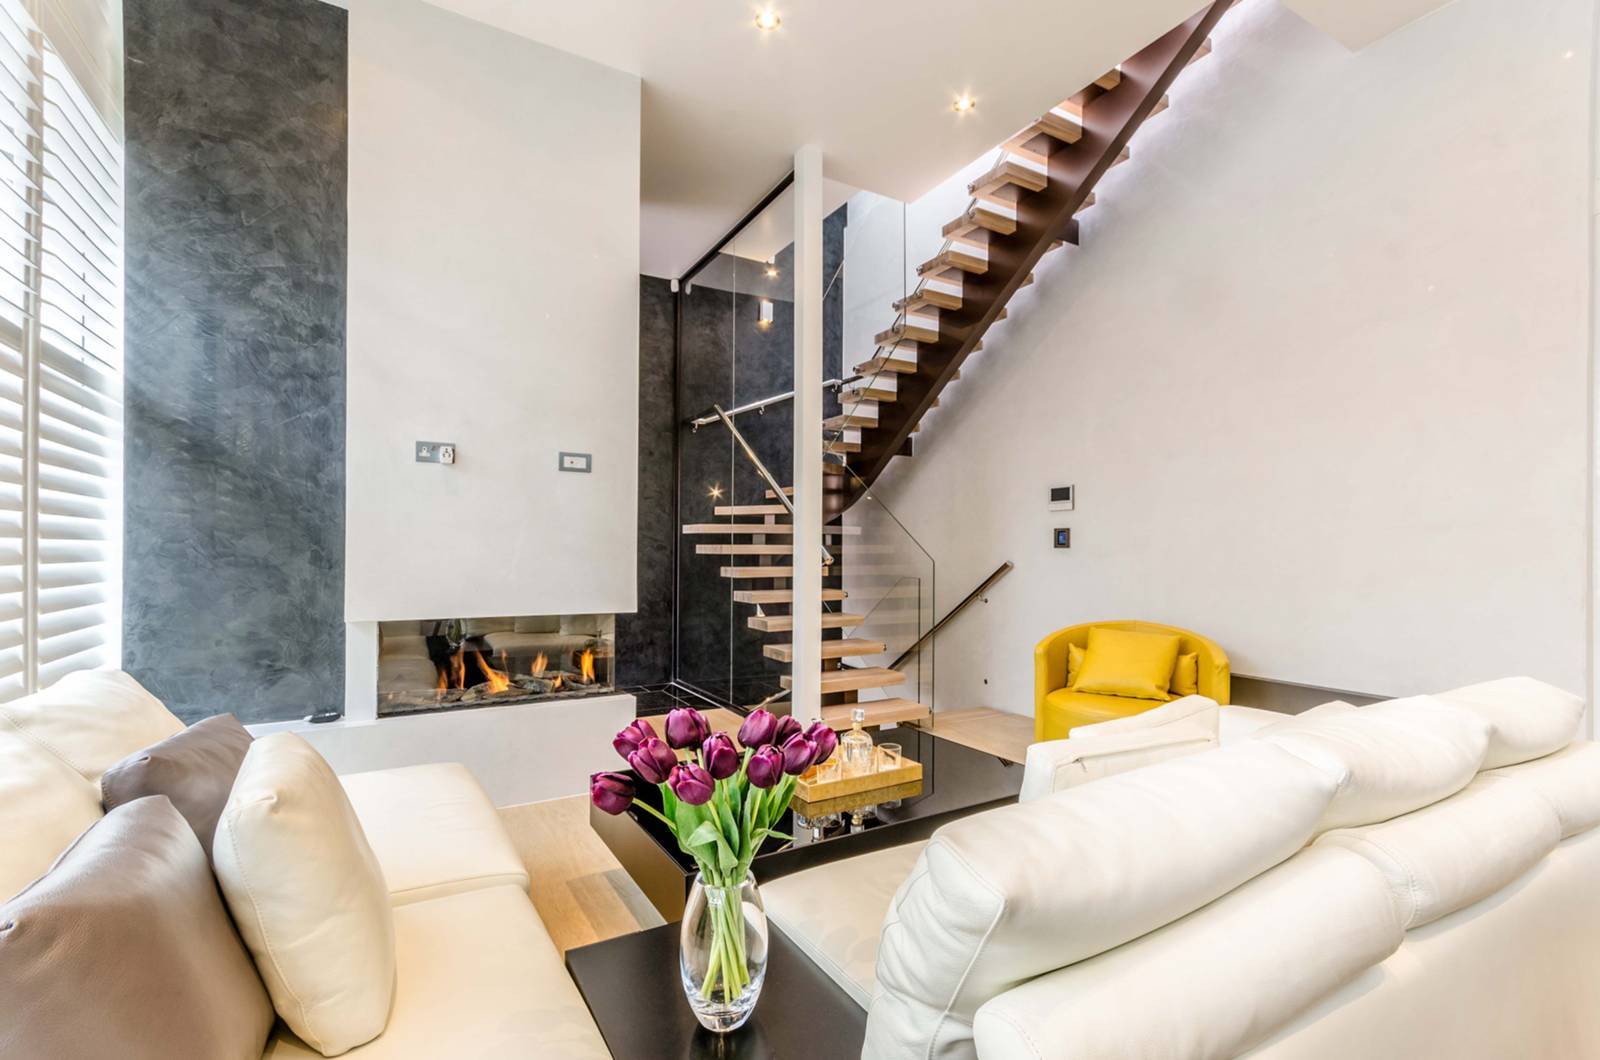 Modern three-bedroom house, featuring the ultimate luxury living and entertaining experience. The property has been designed immaculately benefiting from double-height ceilings, a winter garden and a roof terrace.